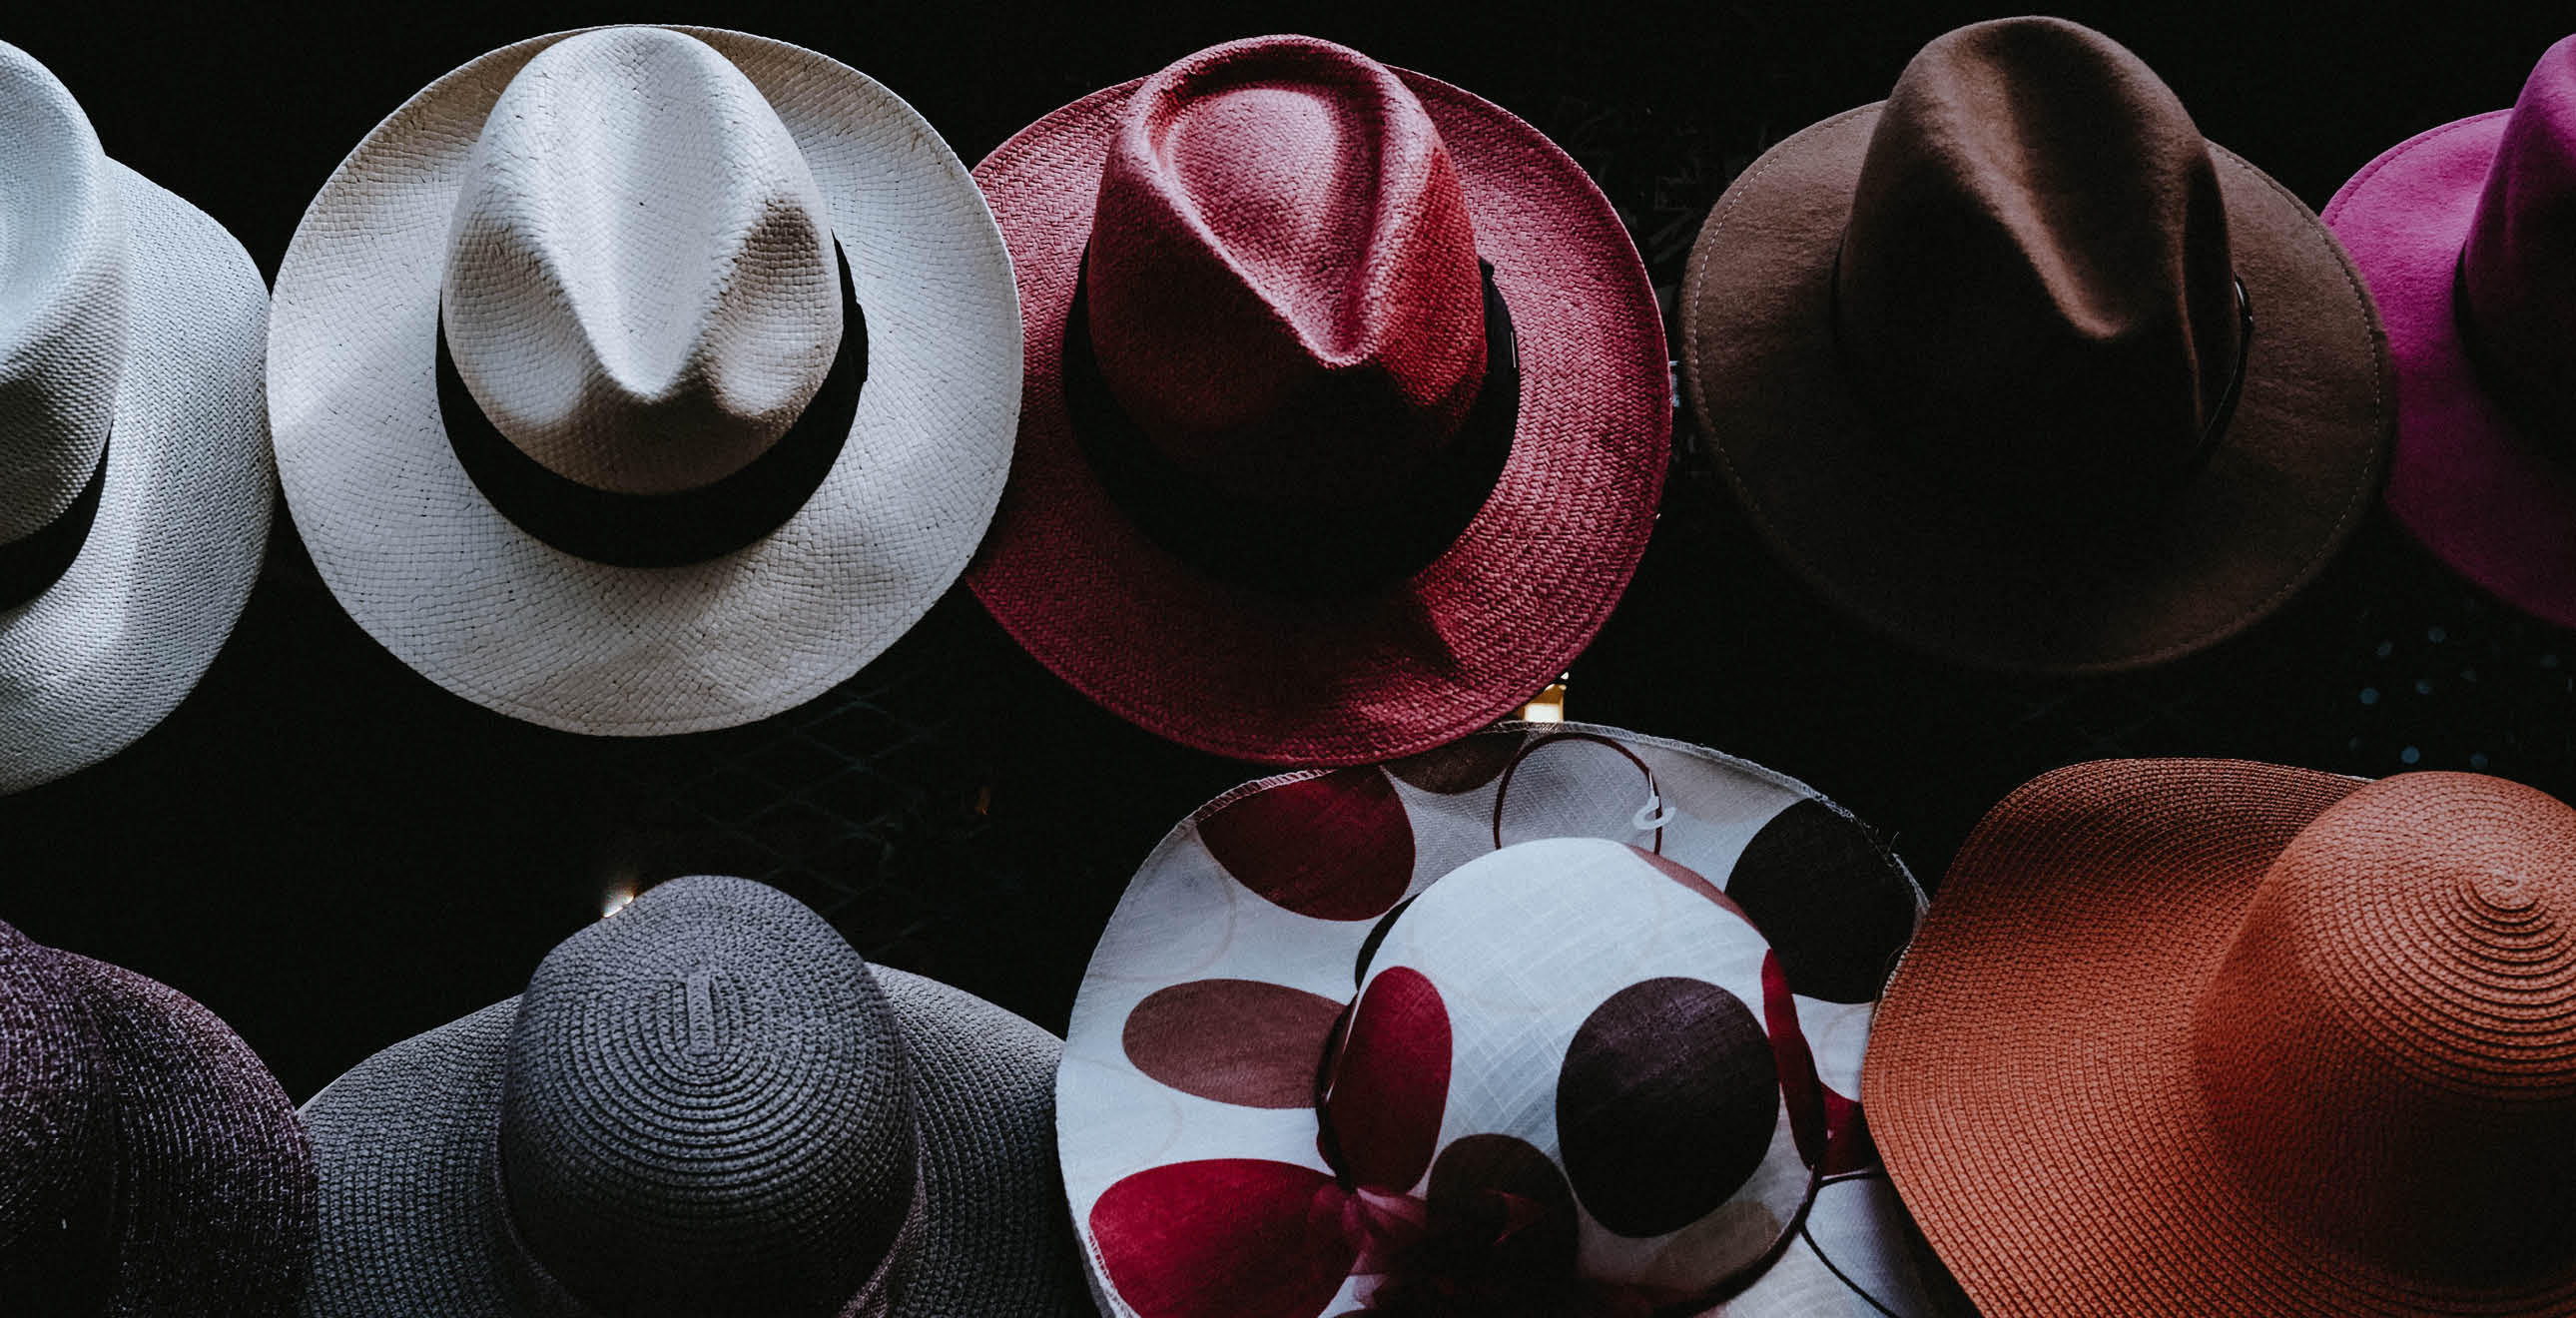 Eight different types of fedoras and sun hats